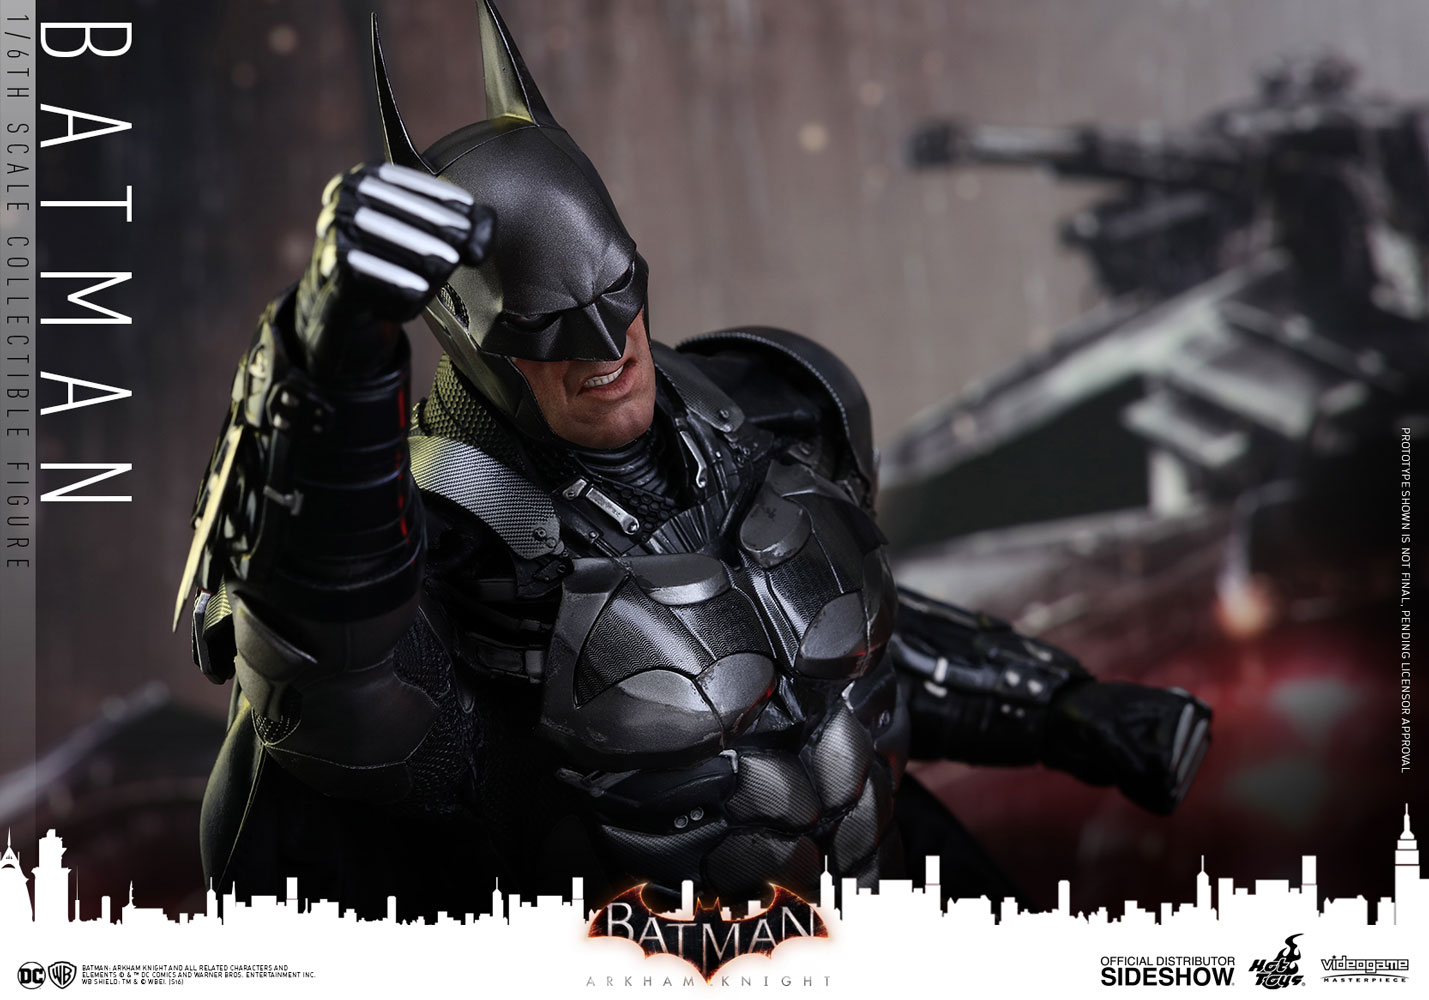 Toys] Hot Toys unveils new Batman sixth-scale figure — Major Spoilers —  Comic Book Reviews, News, Previews, and Podcasts